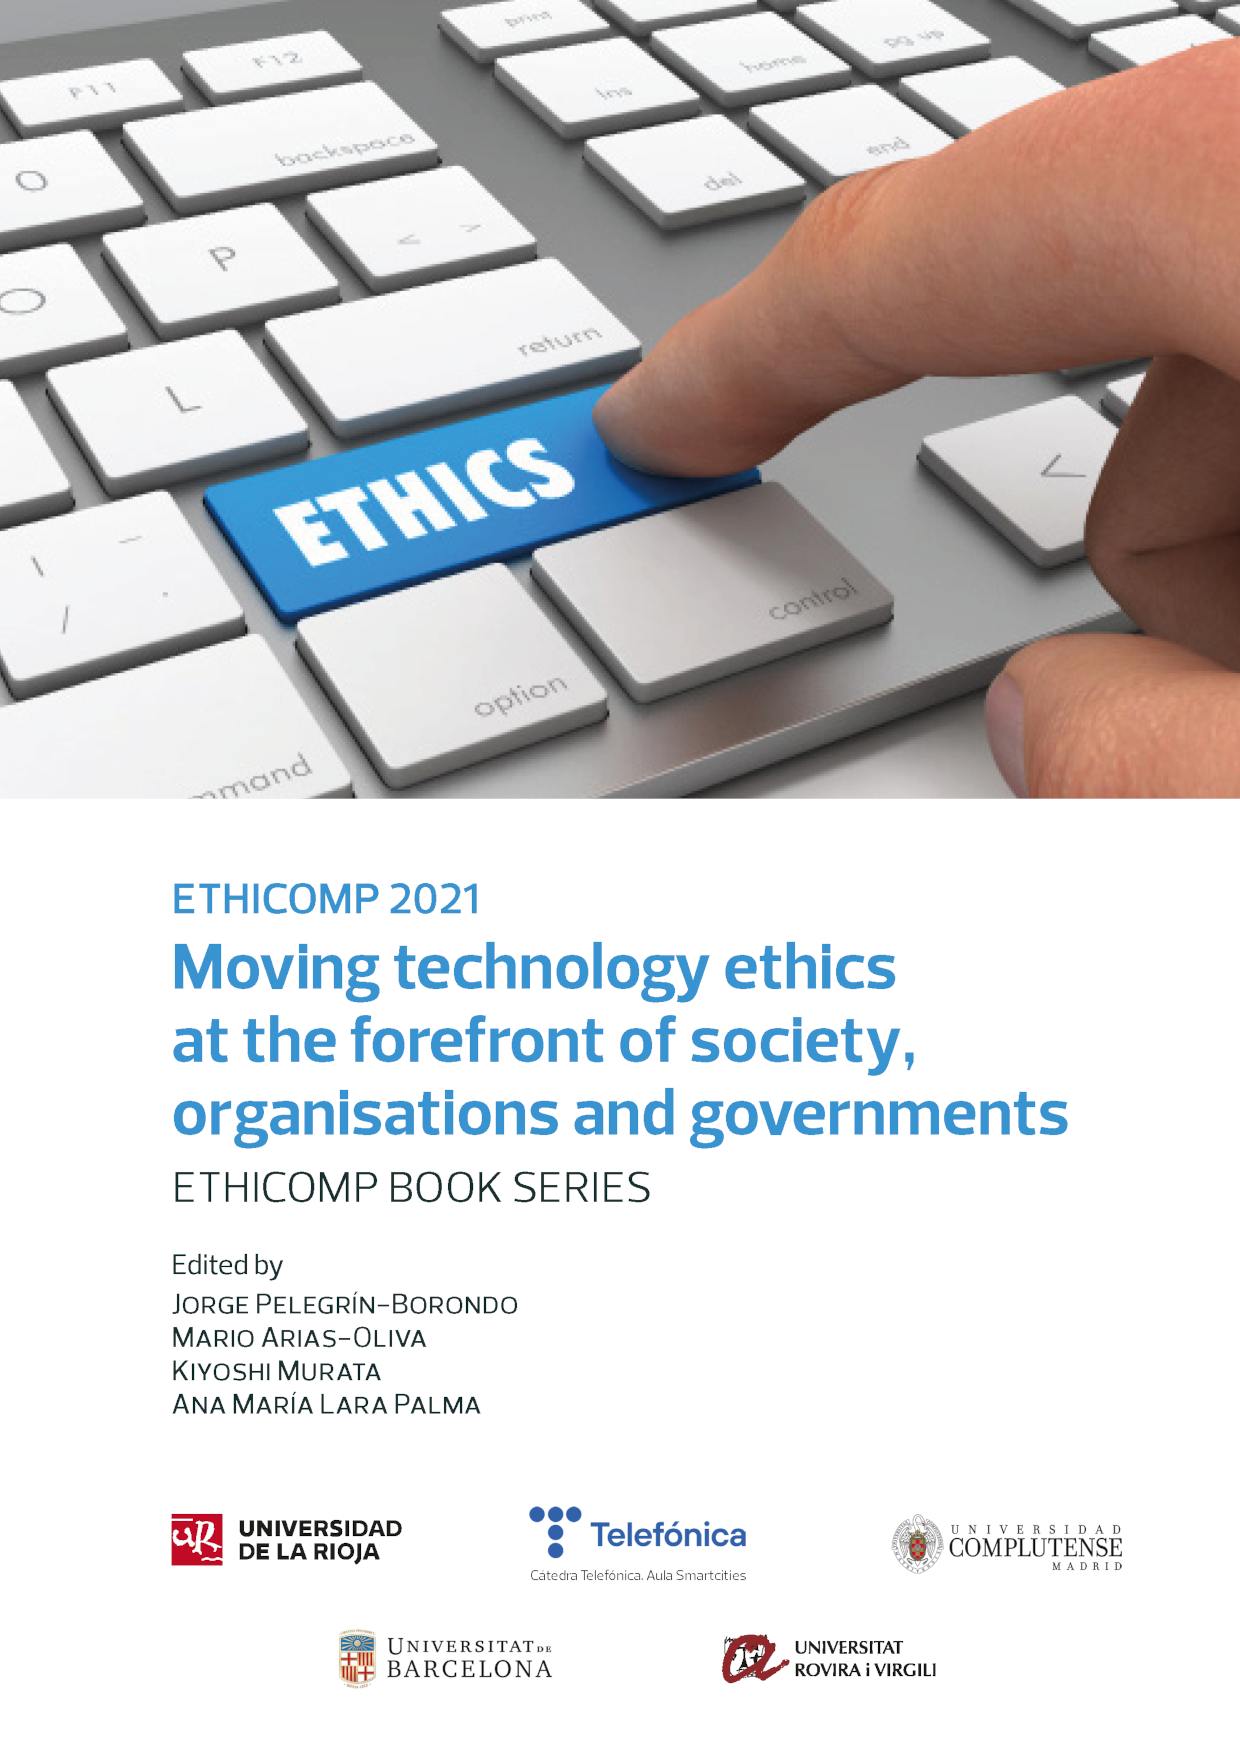 Imagen de portada del libro Moving technology ethics at the forefront of society, organisations and governments